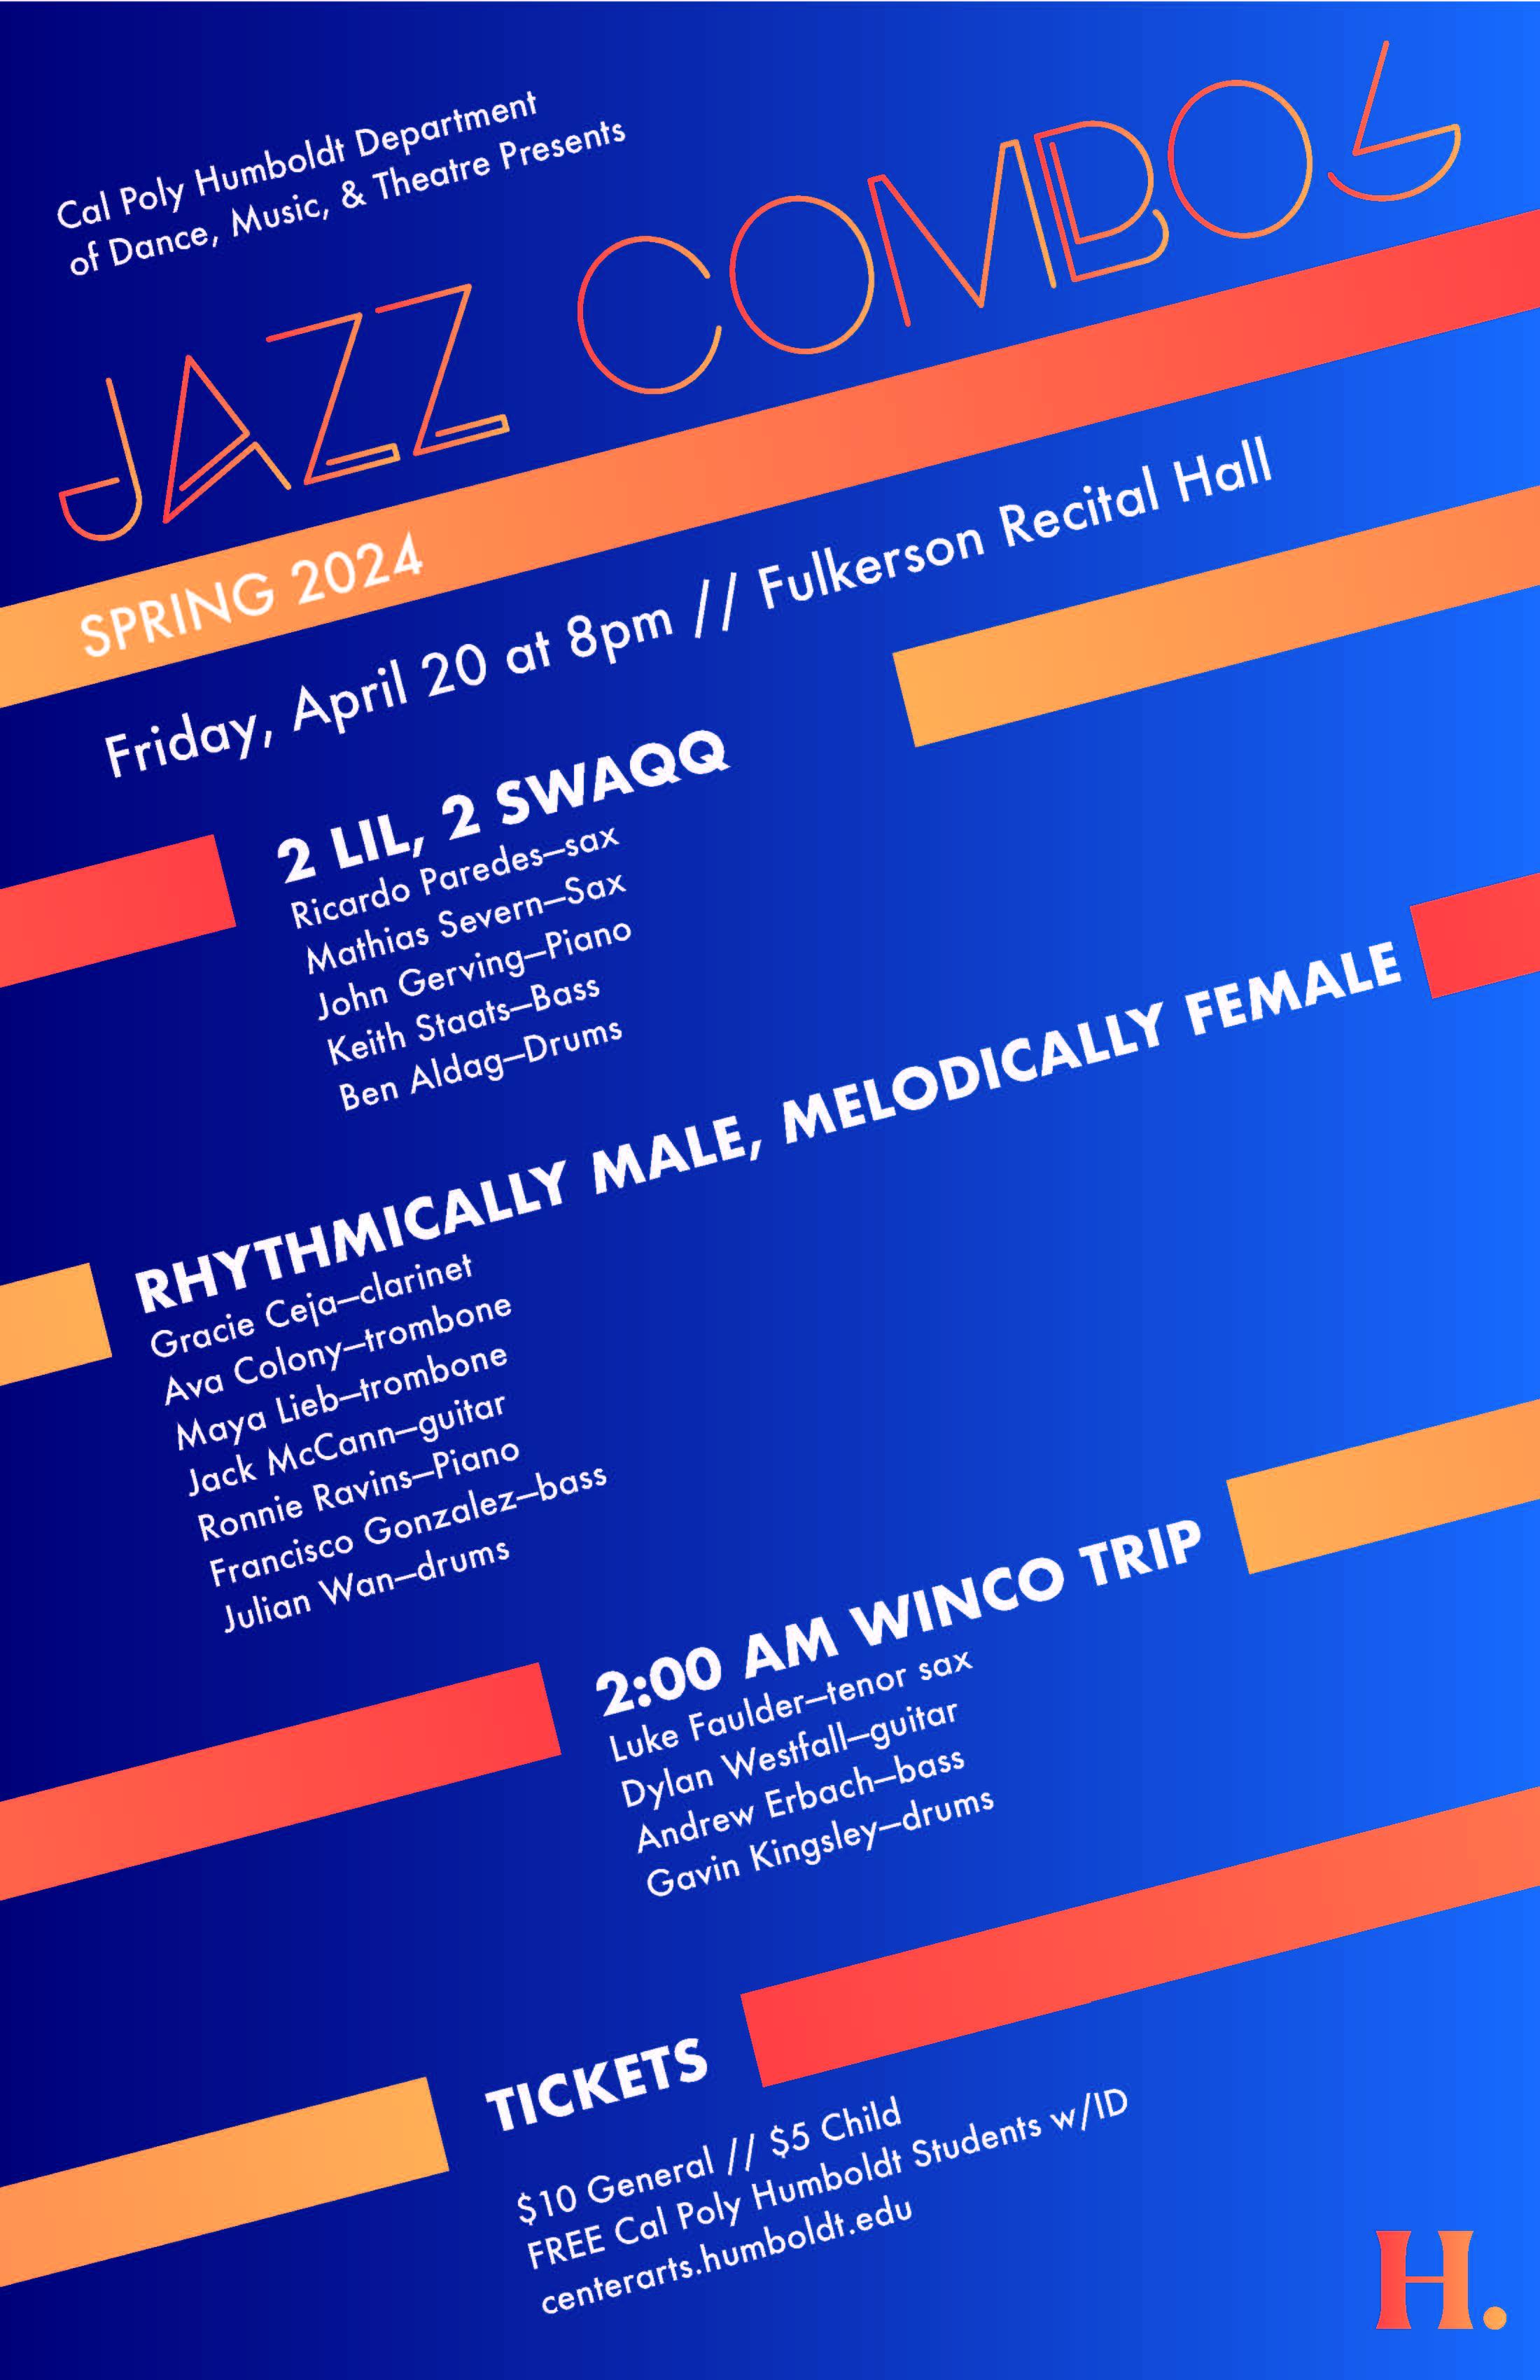 Jazz Combos - Friday, April 20 at 8pm in Fulkerson Recital Hall. Featuring 2 Lil 2 Swaqq; Rhythmically Male, Melodically Female;  and 2:00 AM Winco Trip